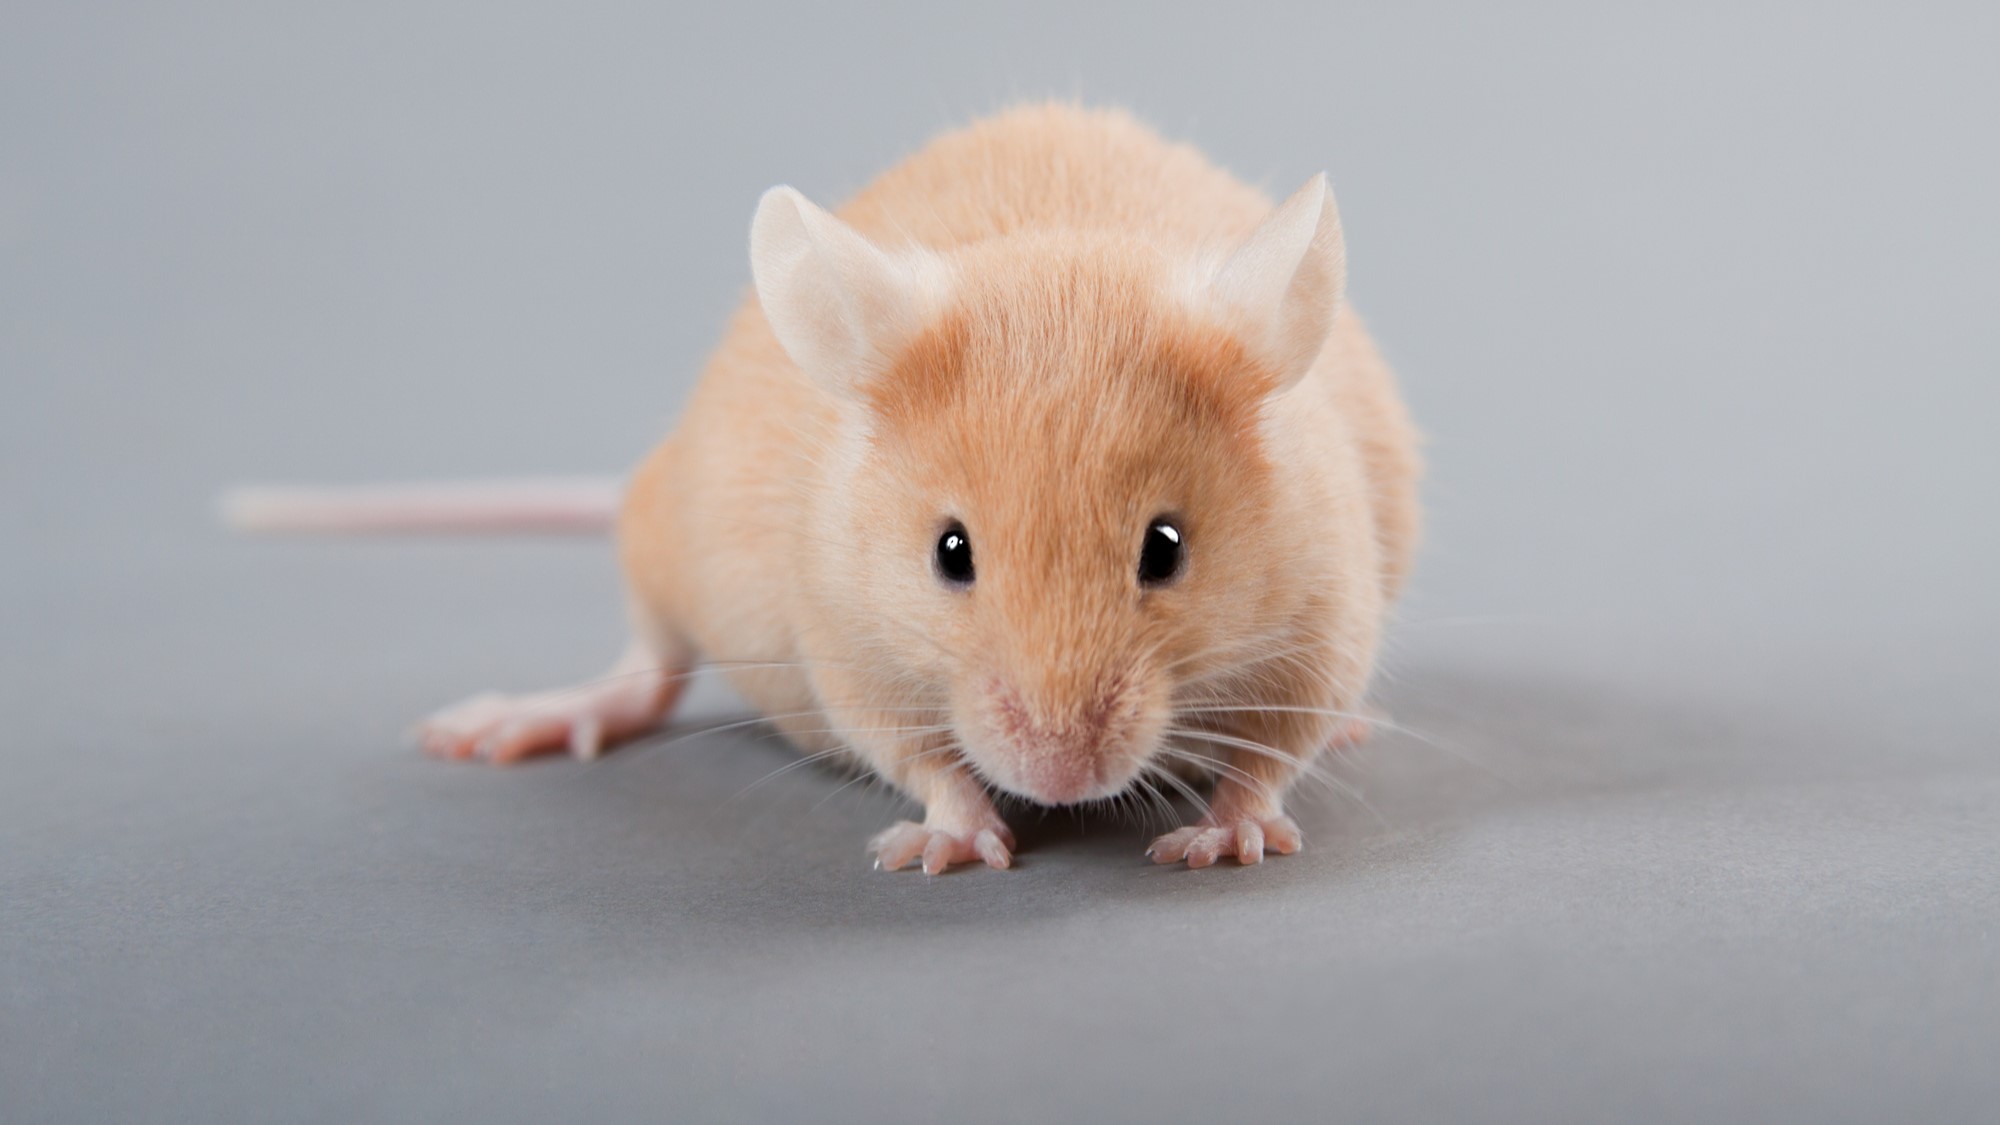 Correlation of ages of human and laboratory hamster in their